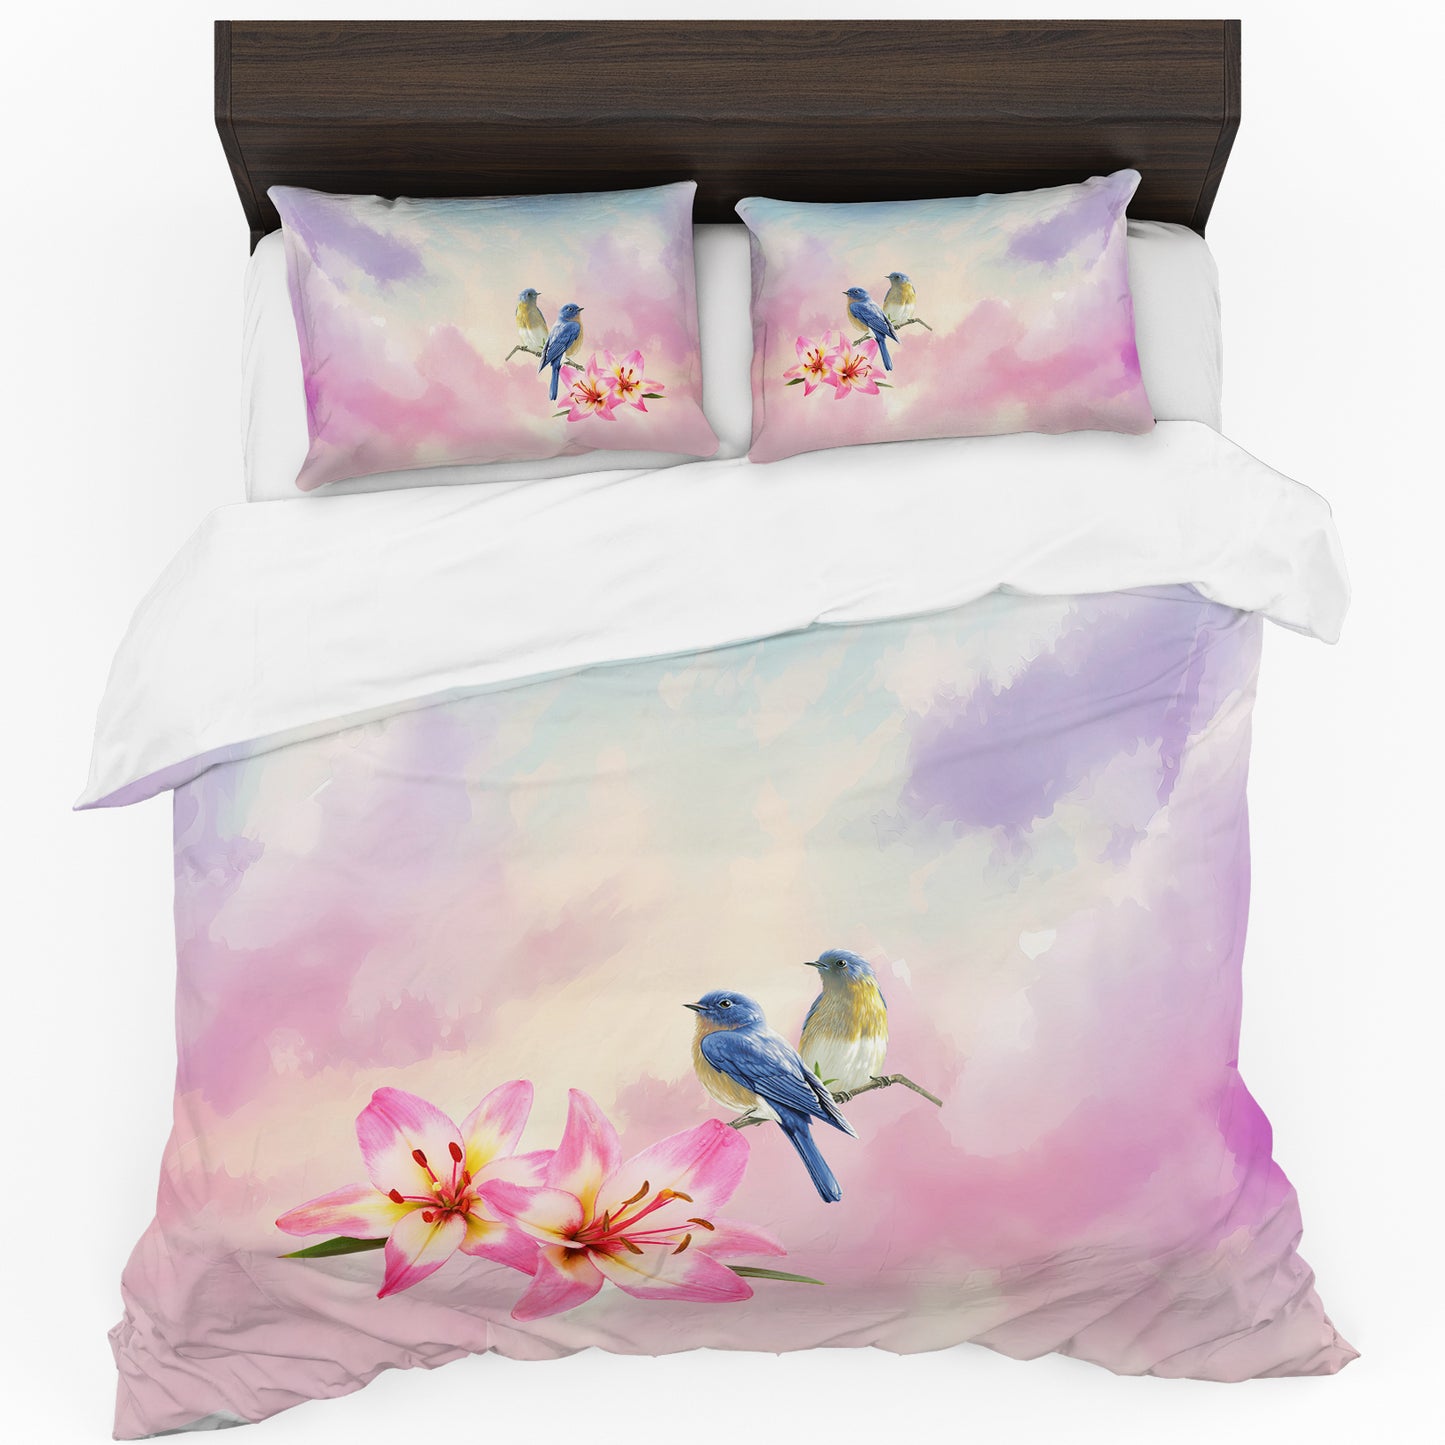 Early Morning Chat Duvet Cover Set